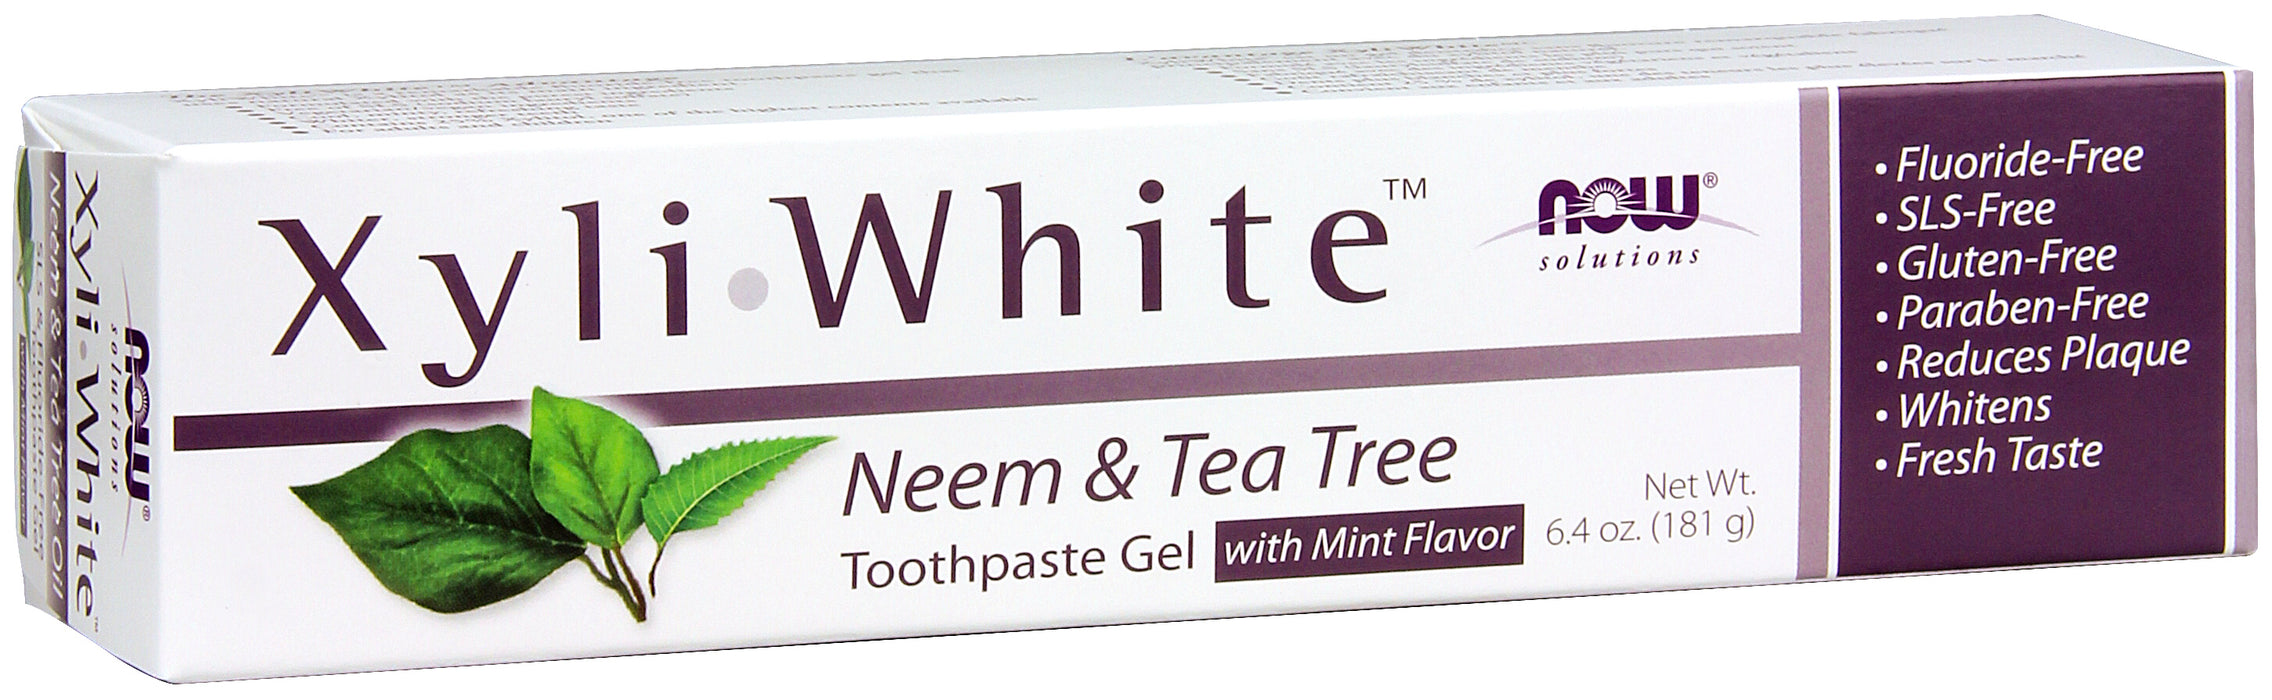 NOW Solutions® XyliWhite Neem and Tea Tree Toothpaste Gel 181g